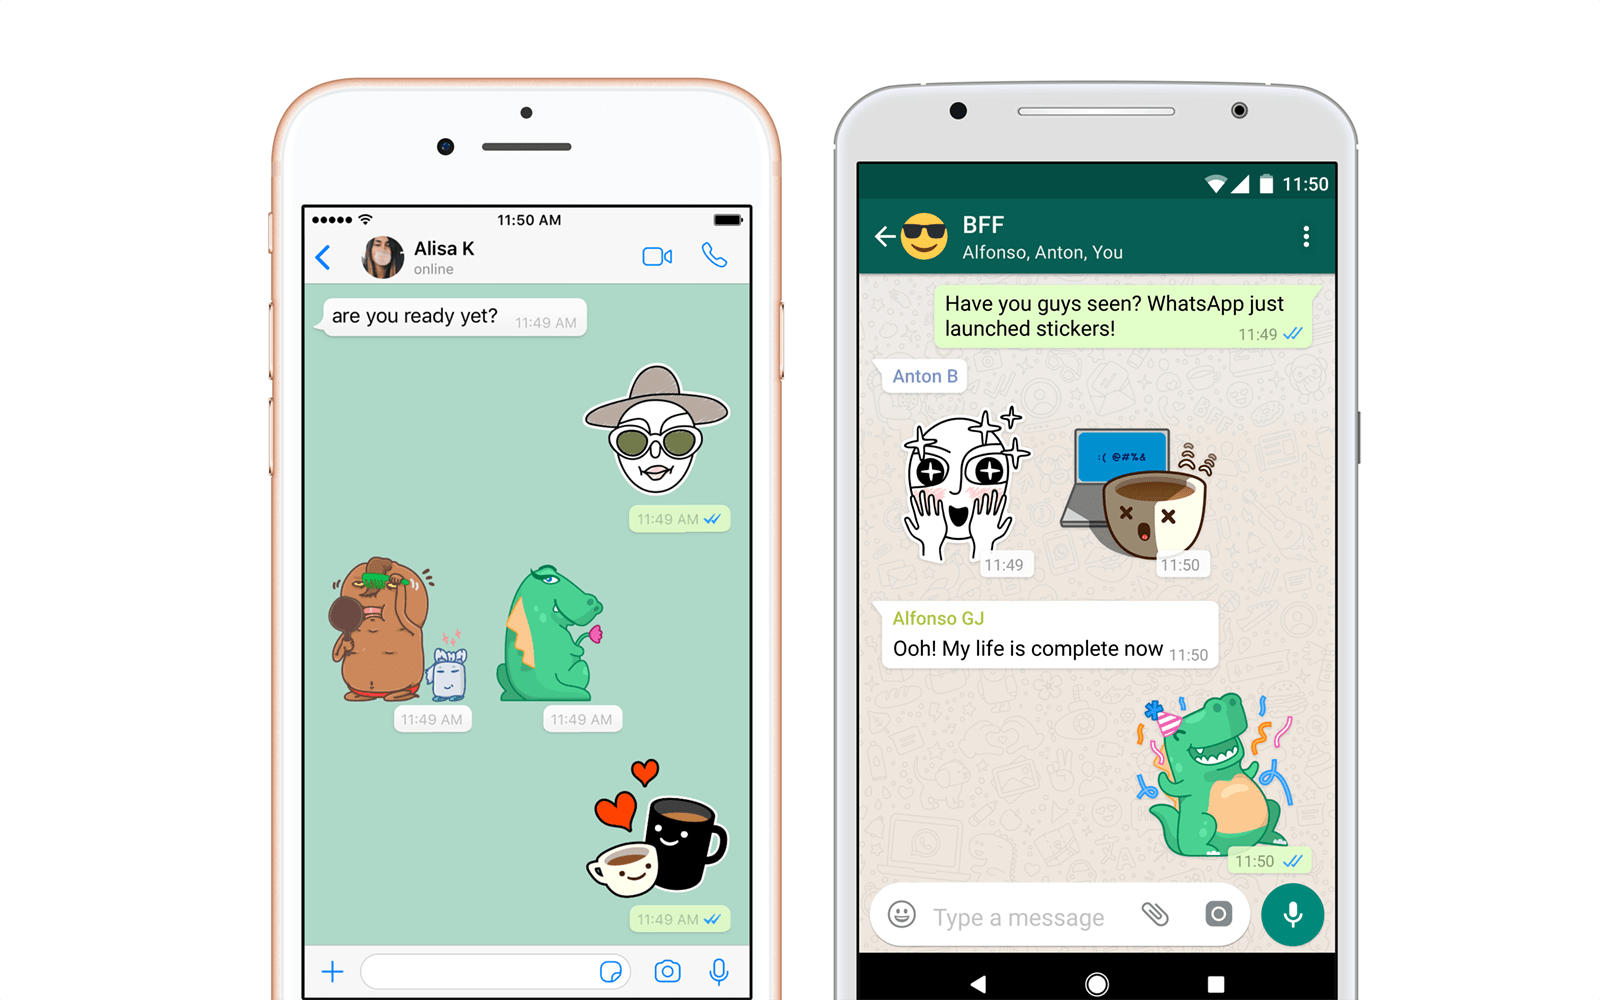 WhatsApp Finally Adds Support for Stickers in Latest 